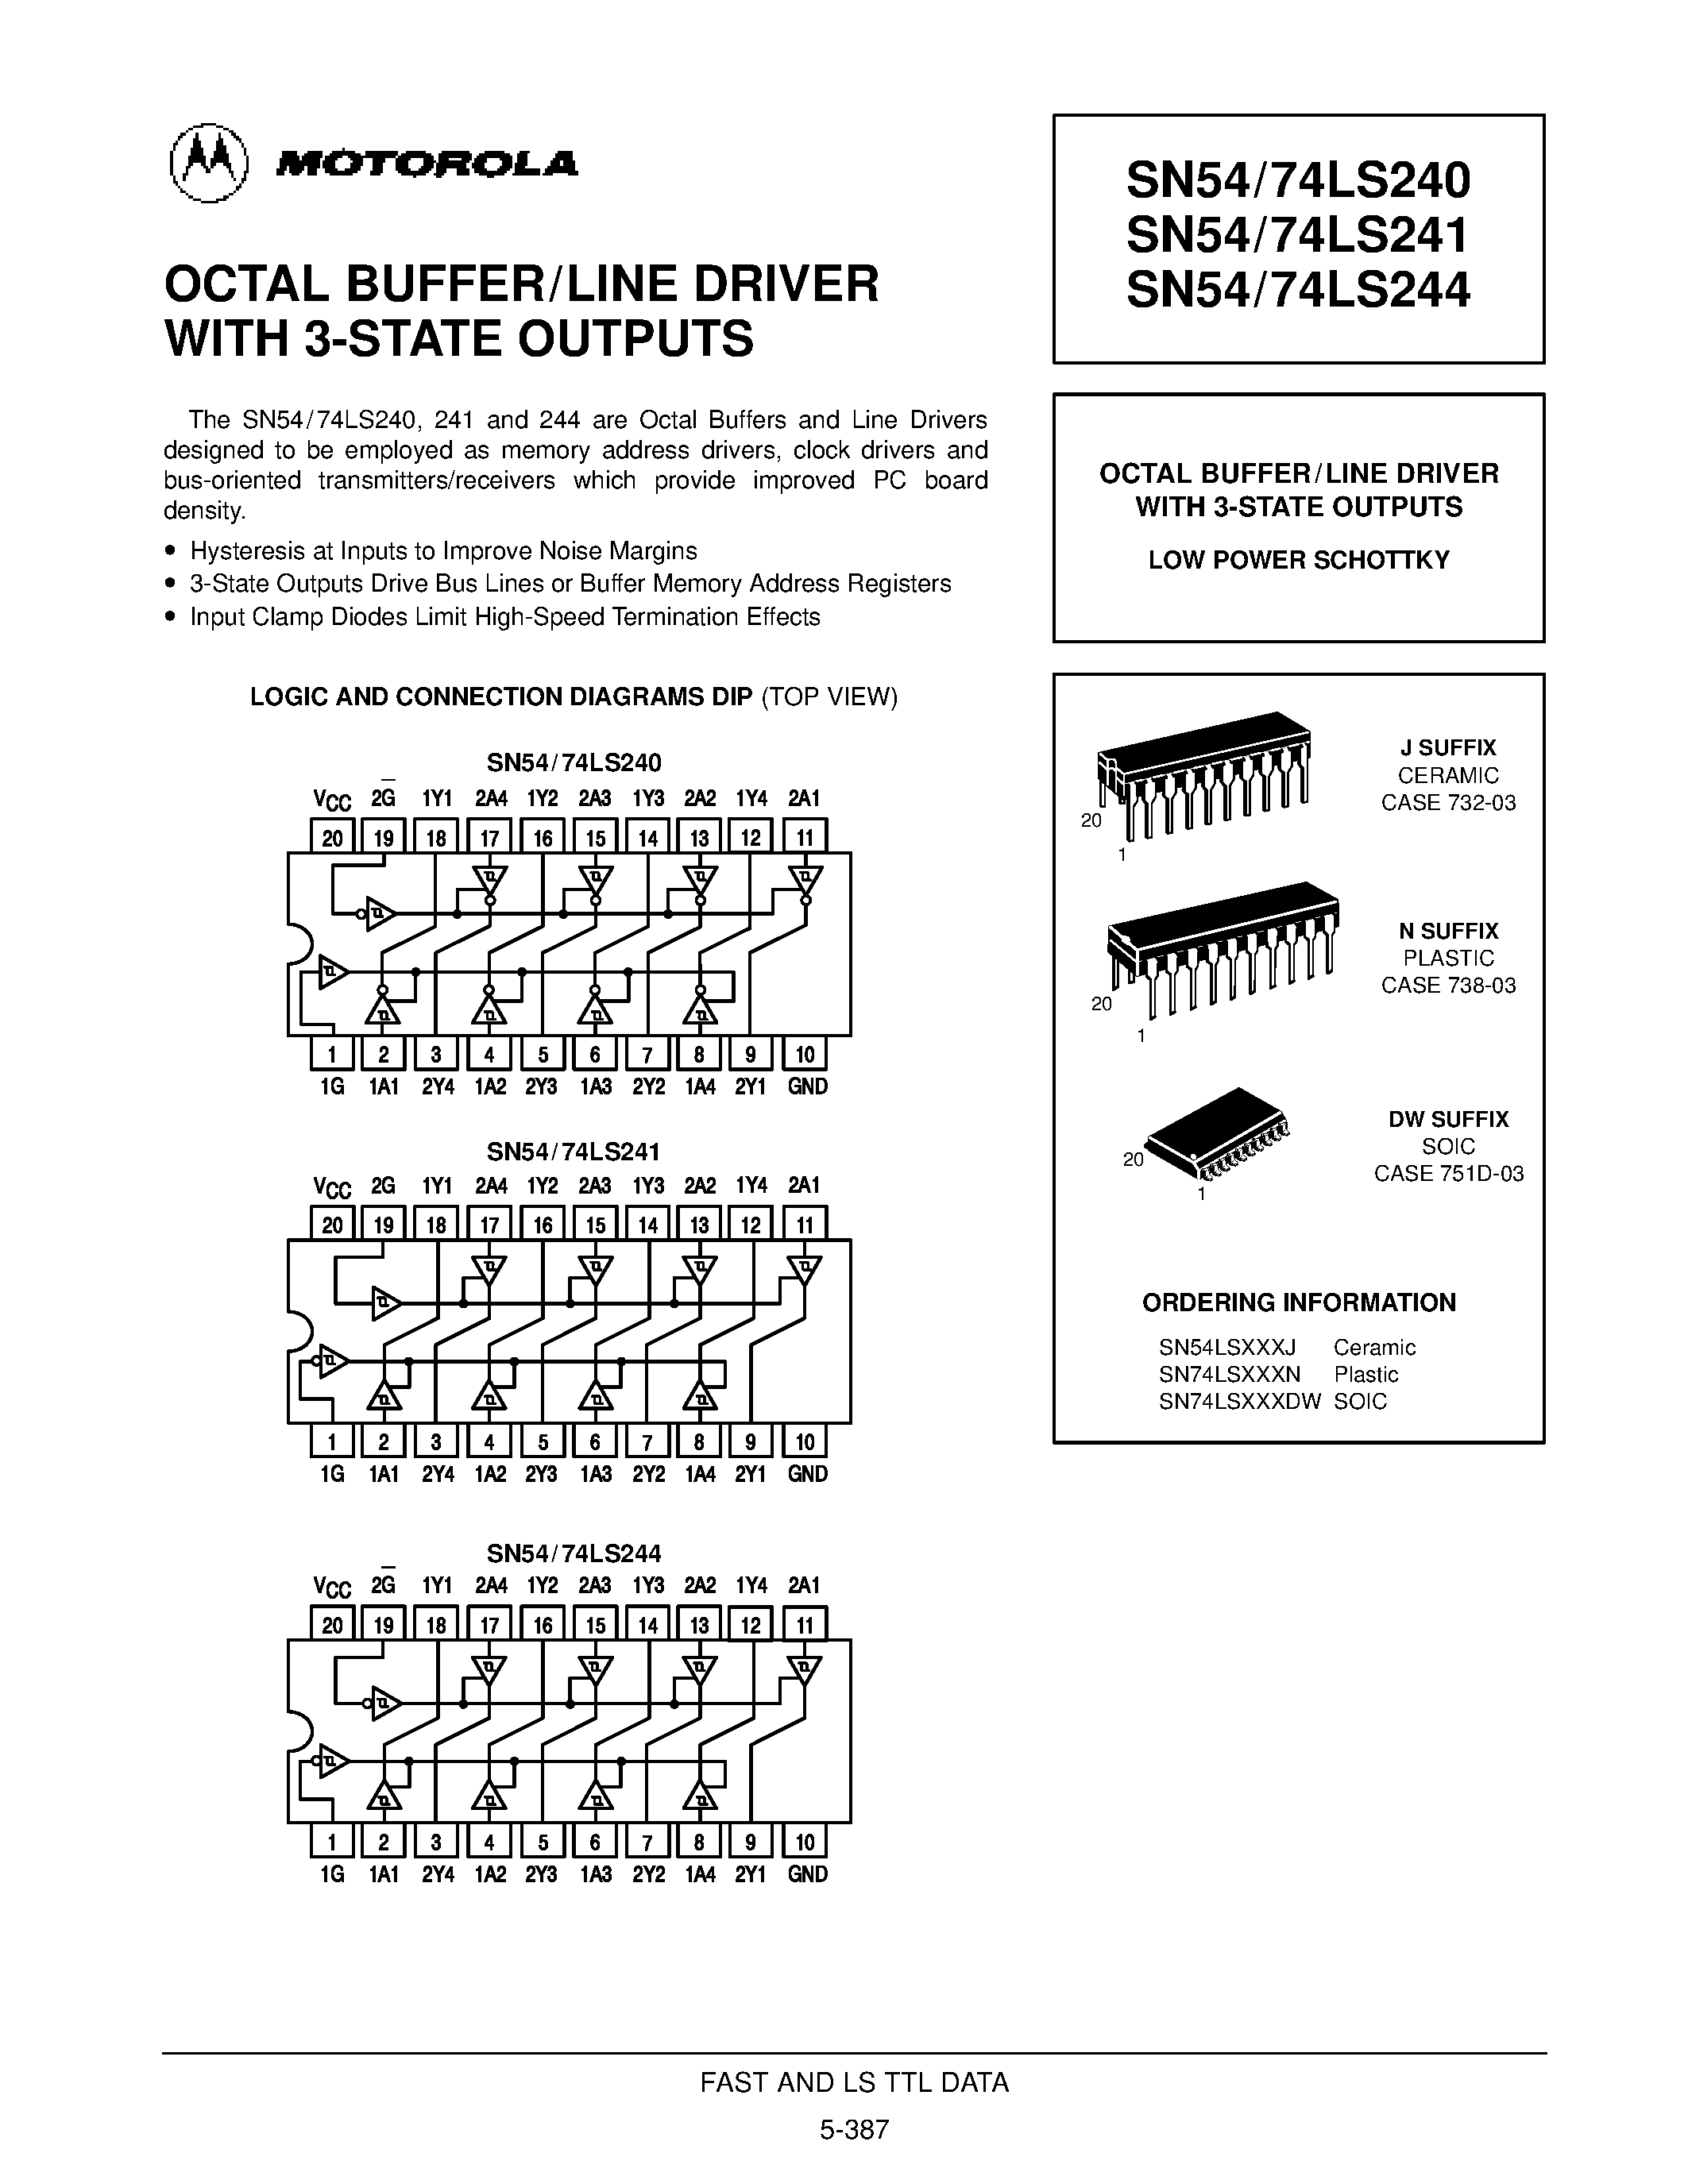 Datasheet SN74LS240N - OCTAL BUFFER/LINE DRIVER WITH 3-STATE OUTPUTS page 1